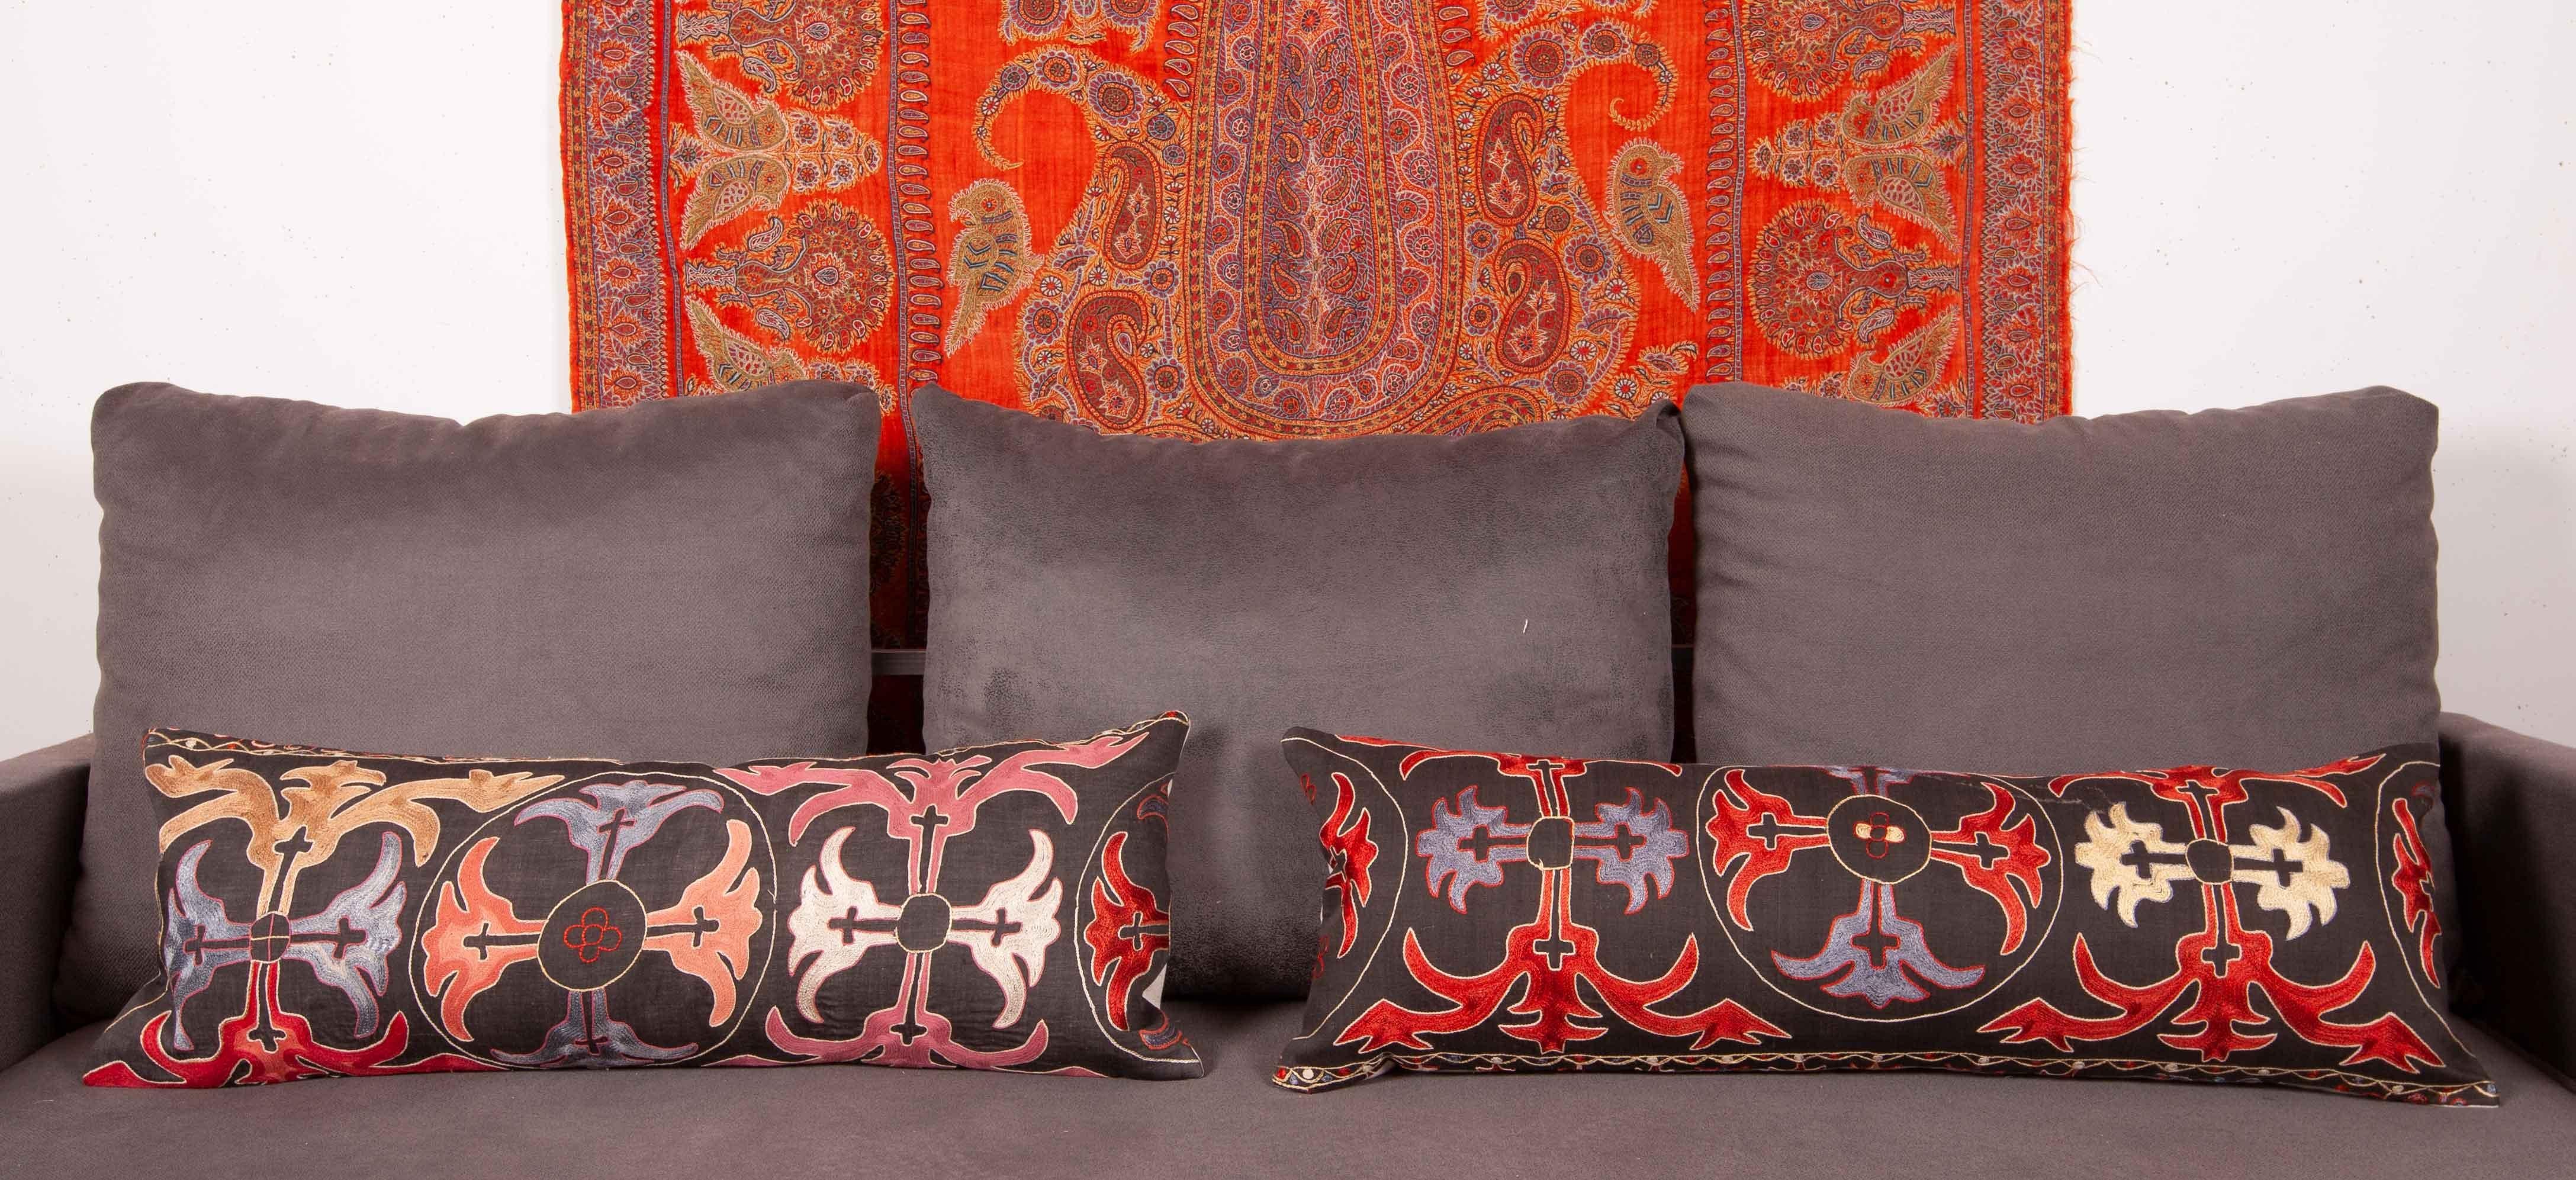 Kazakhstani Vintage  Pillow Cases fashioned from a Kyrgyz or Kazak Embroidery For Sale